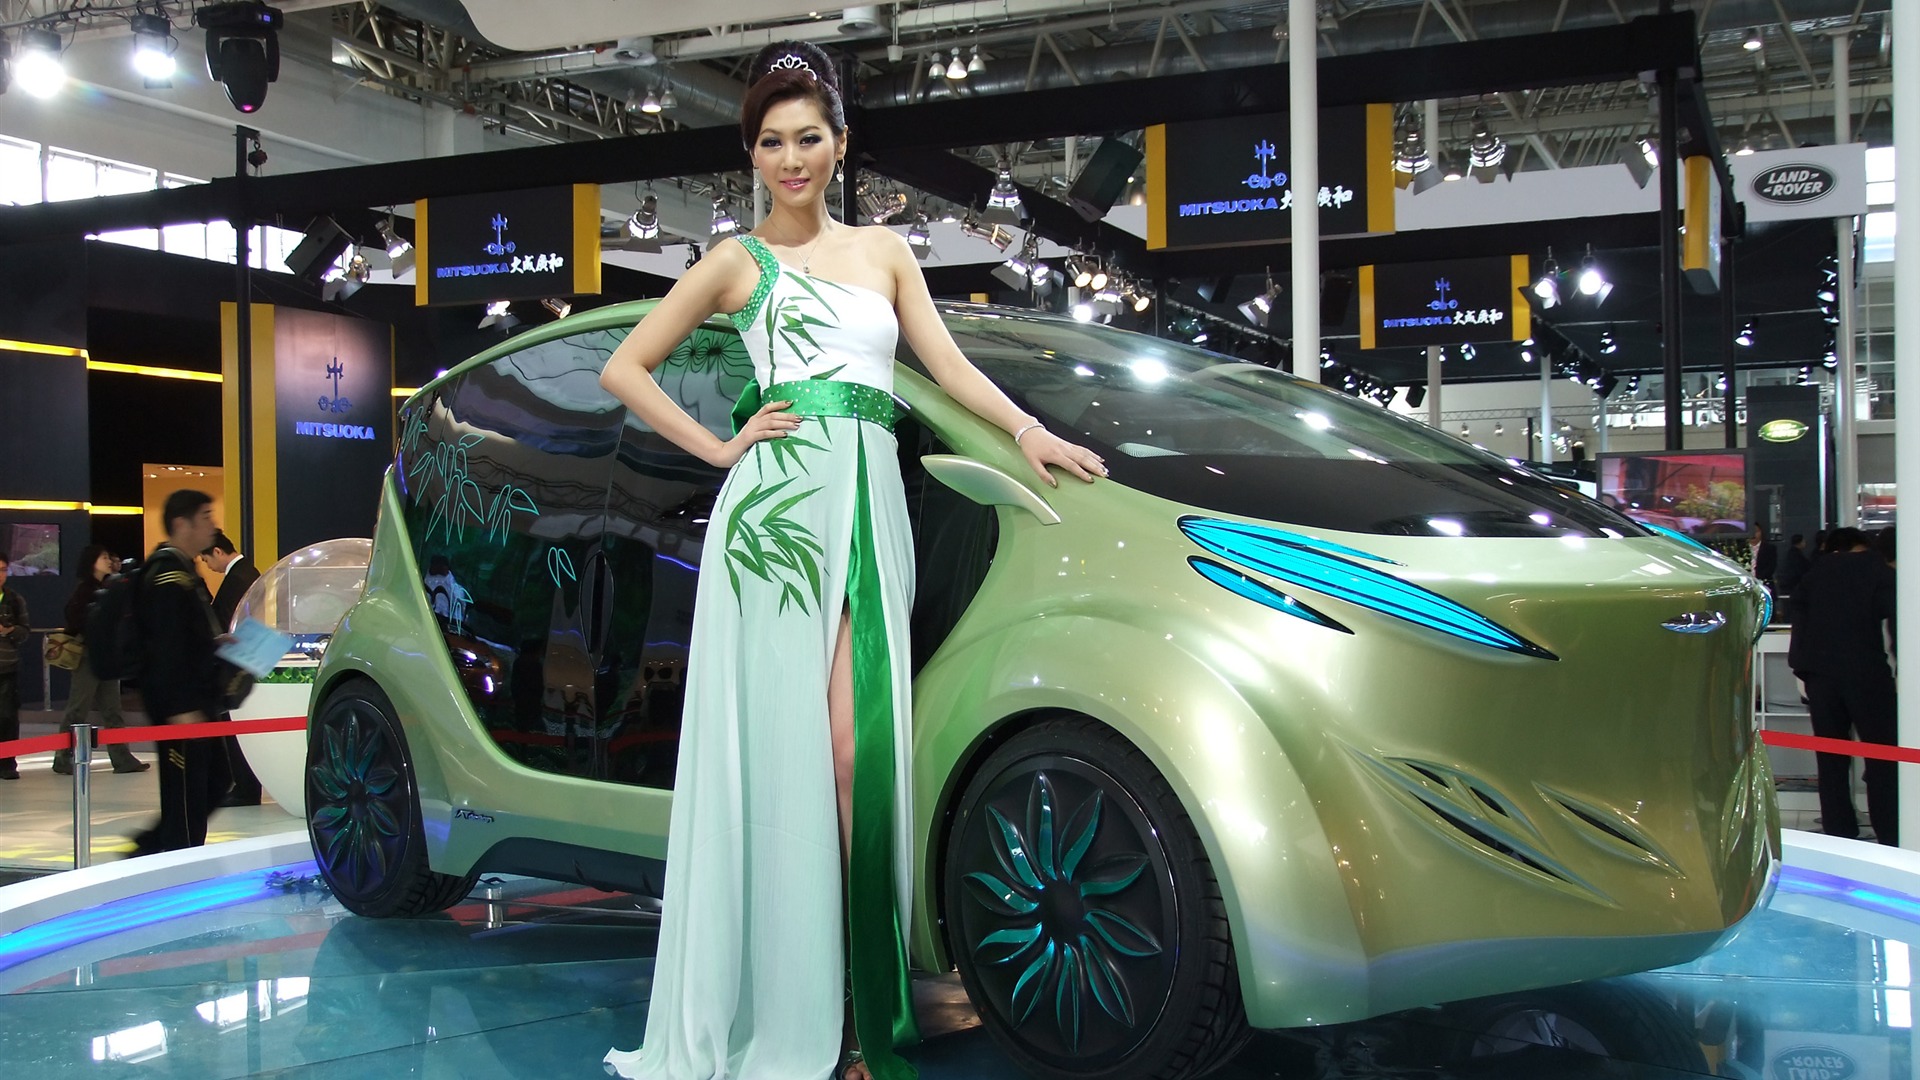 2010 Beijing Auto Show car models Collection (2) #2 - 1920x1080